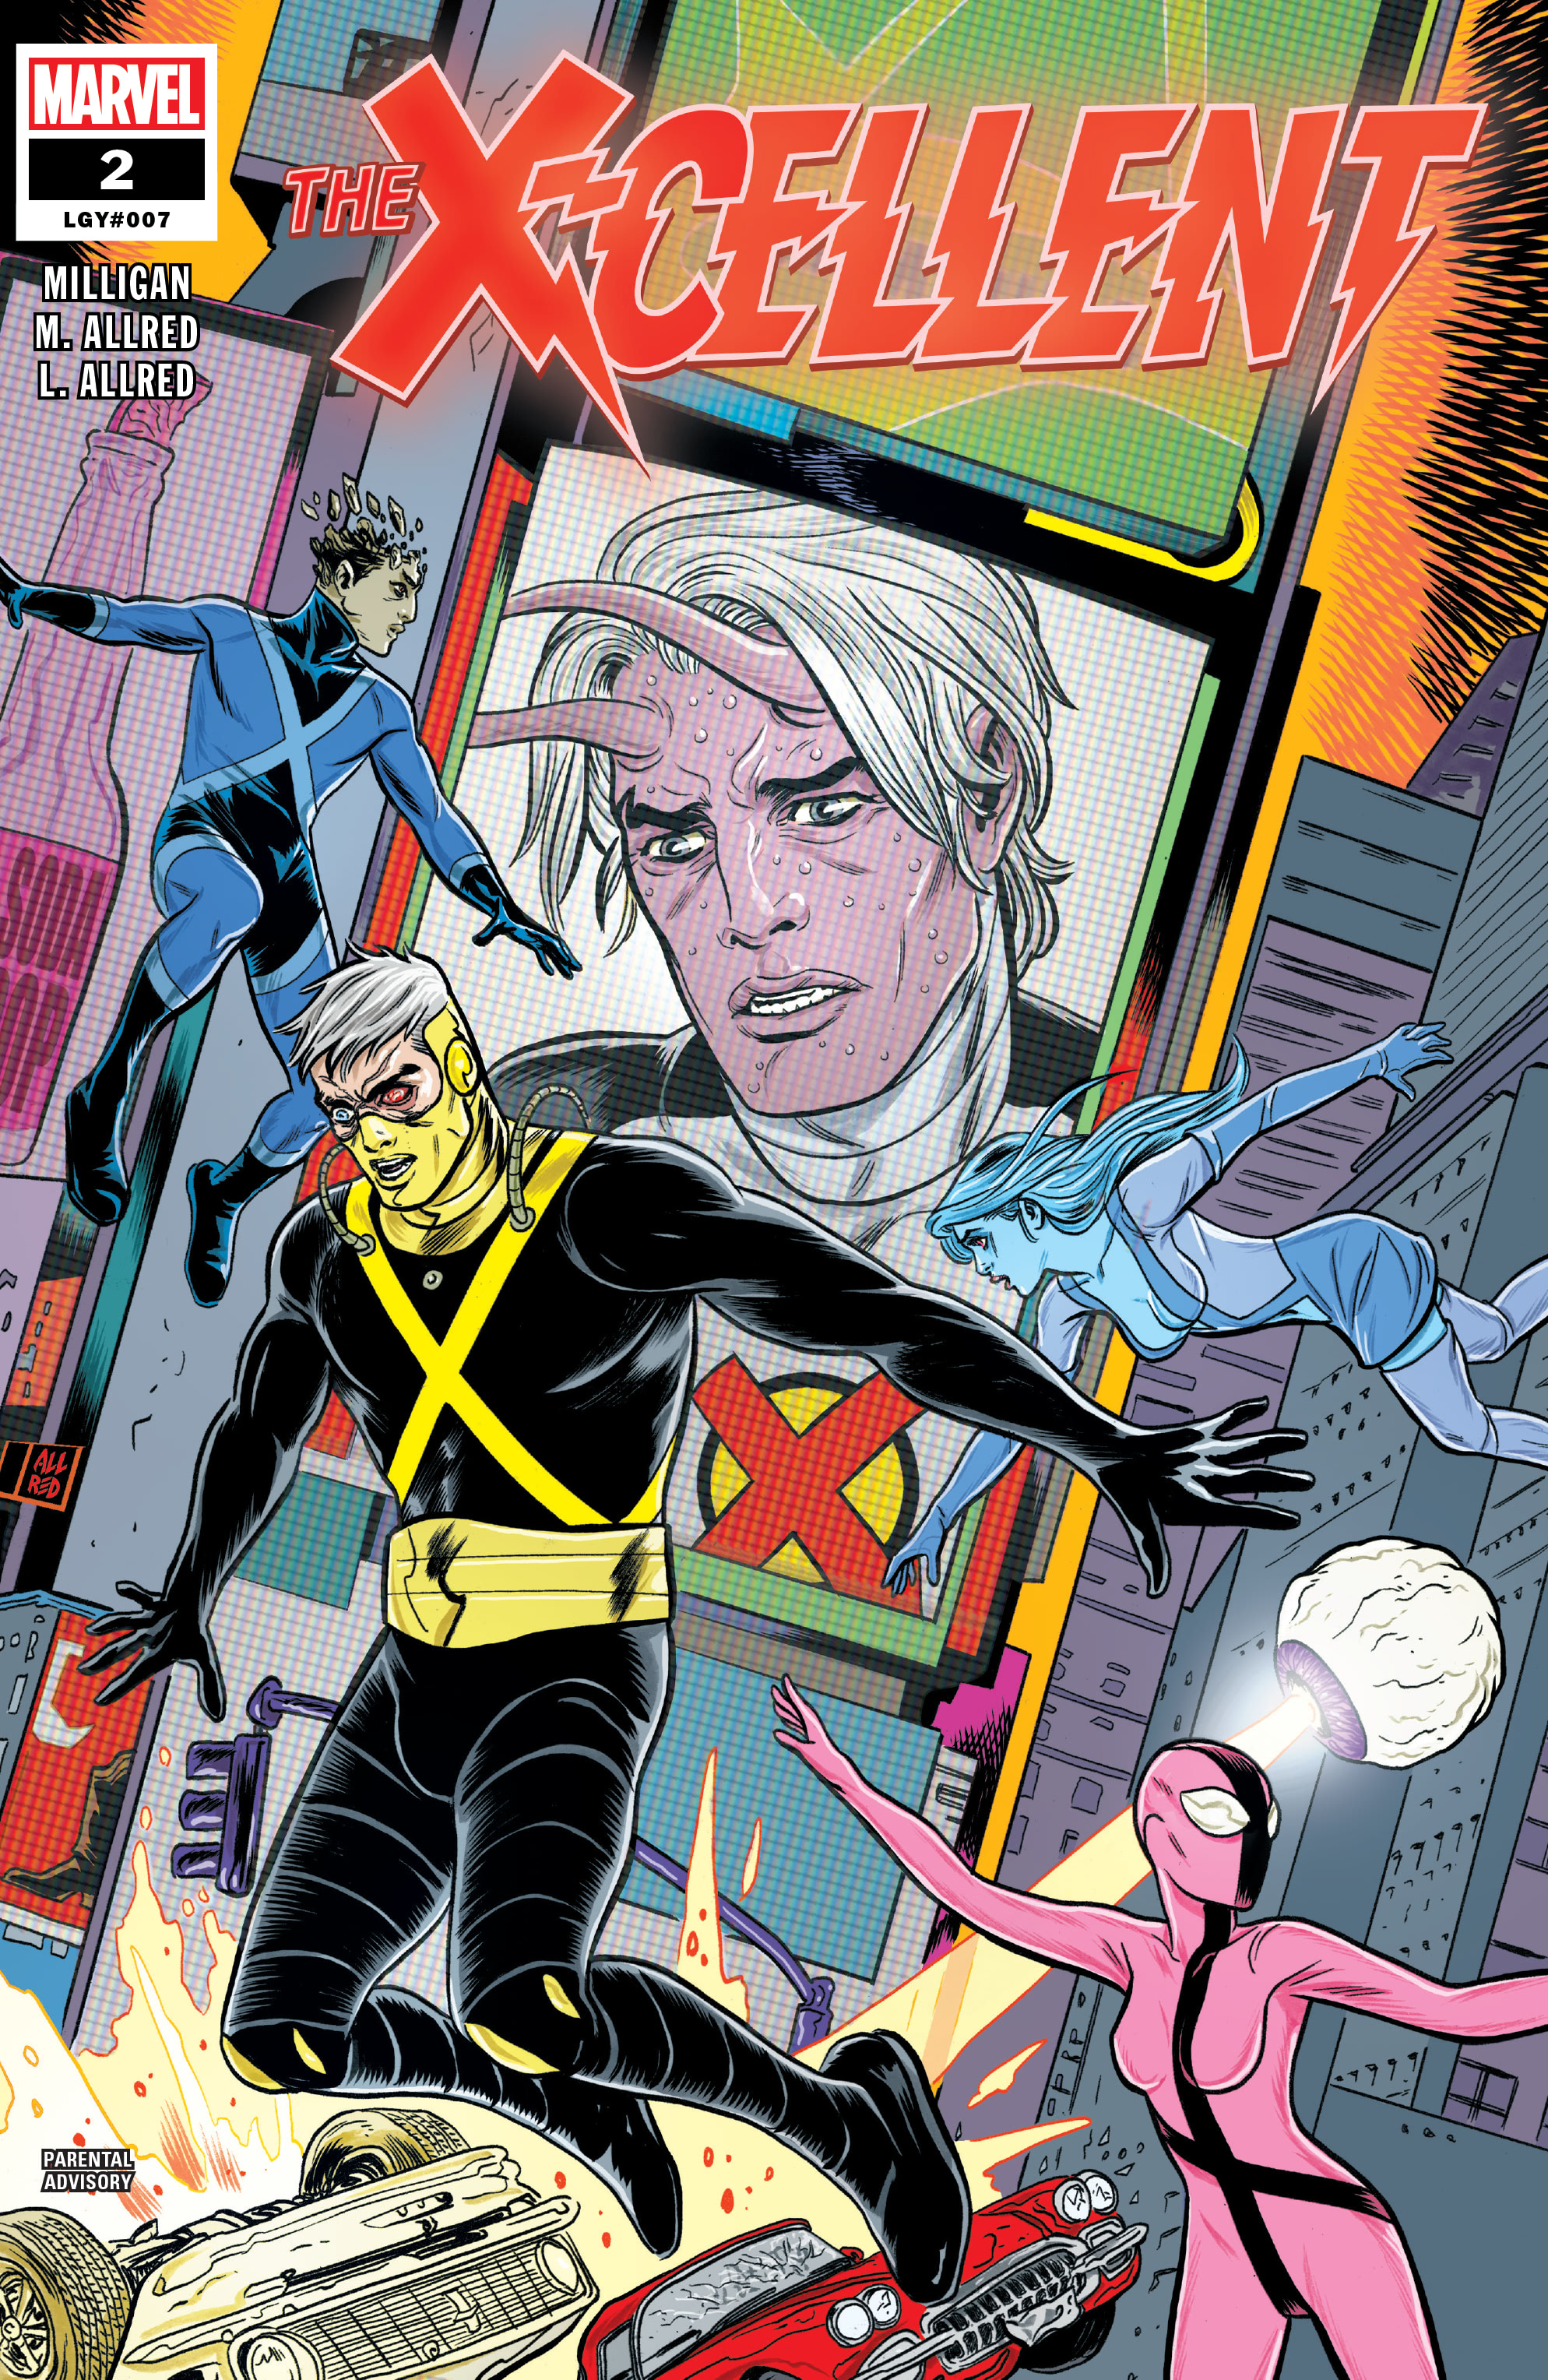 Read online The X-cellent comic -  Issue #2 - 1